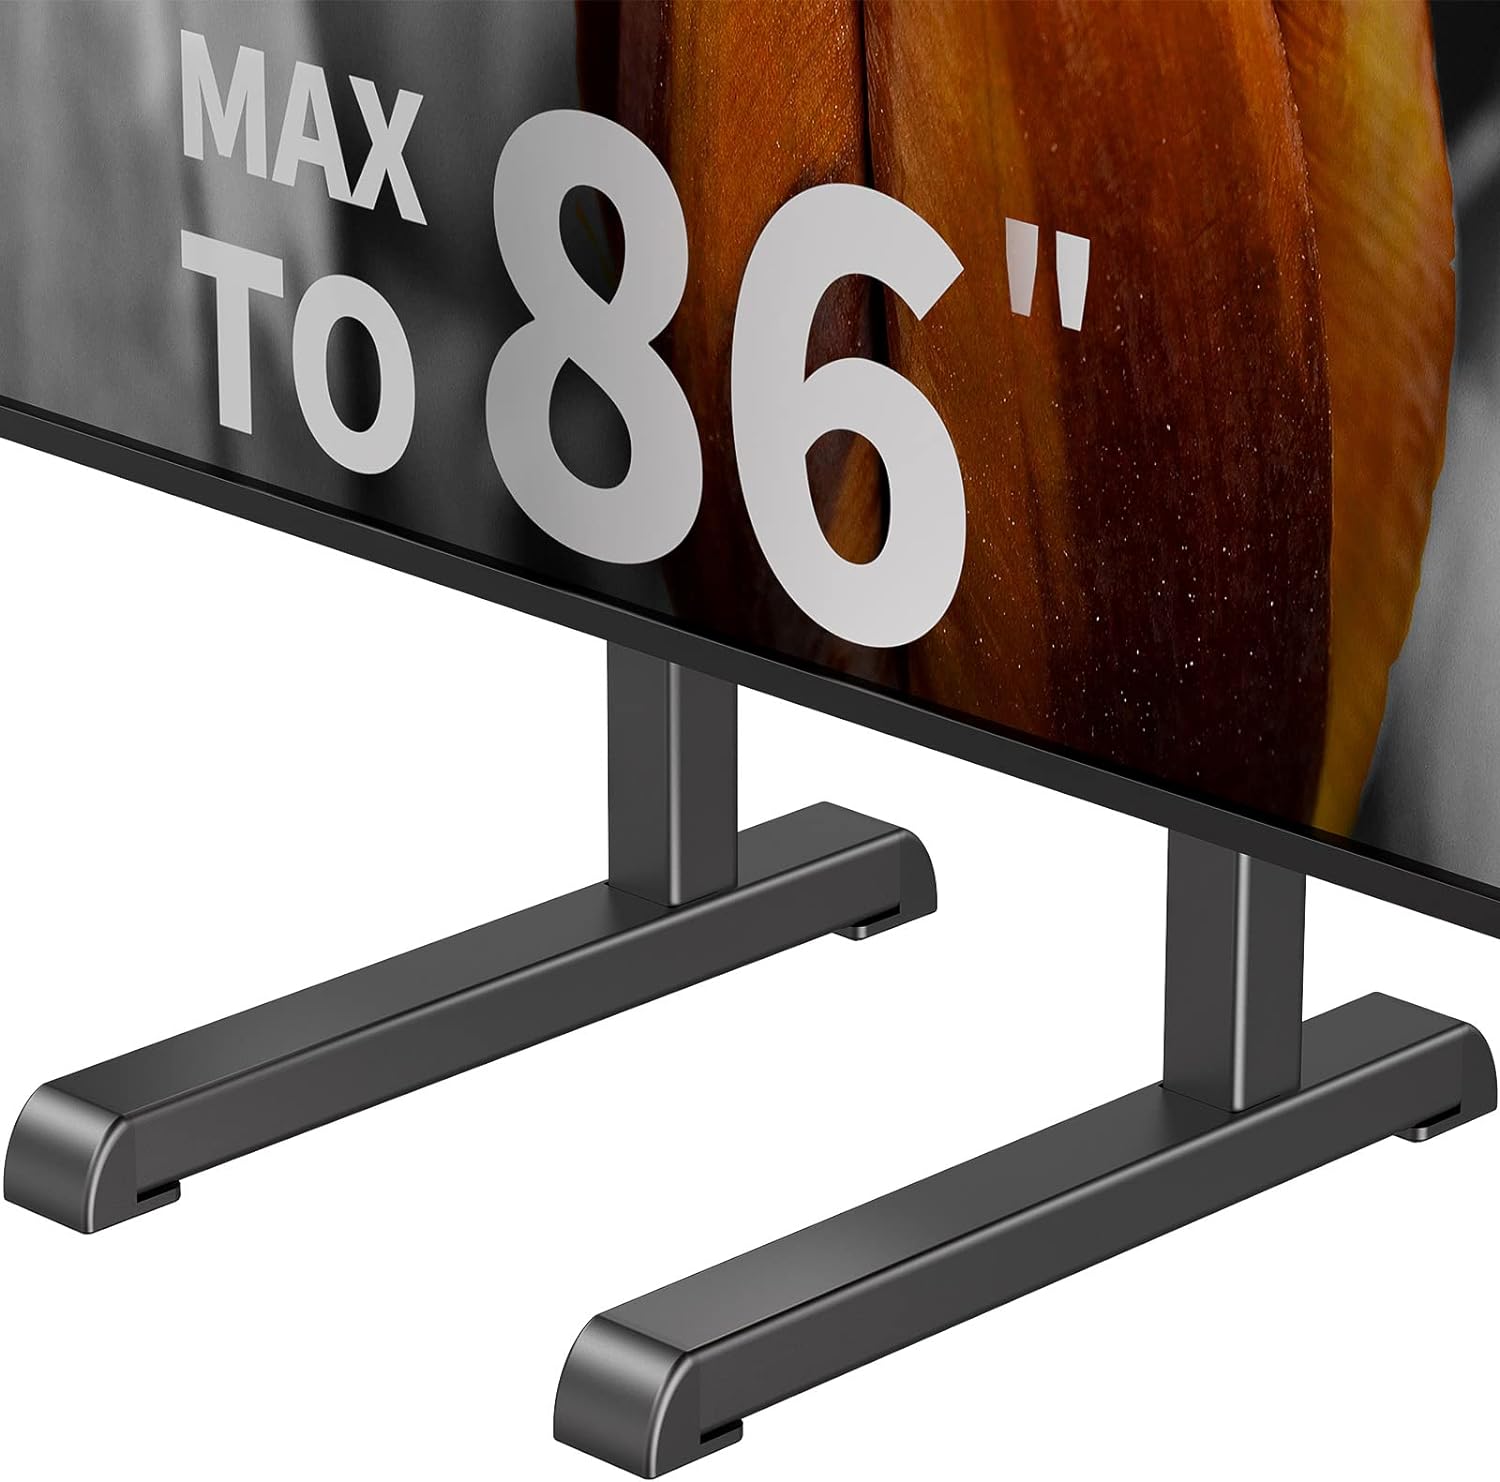 Universal Table Top TV Stand Base Replacement for Most 24 to 86 Inch LCD LED TVs, 7 Height Adjustable TV Legs with Cable Management Hold up to 132lbs, Max VESA 800x600mm, Black AX10TB01